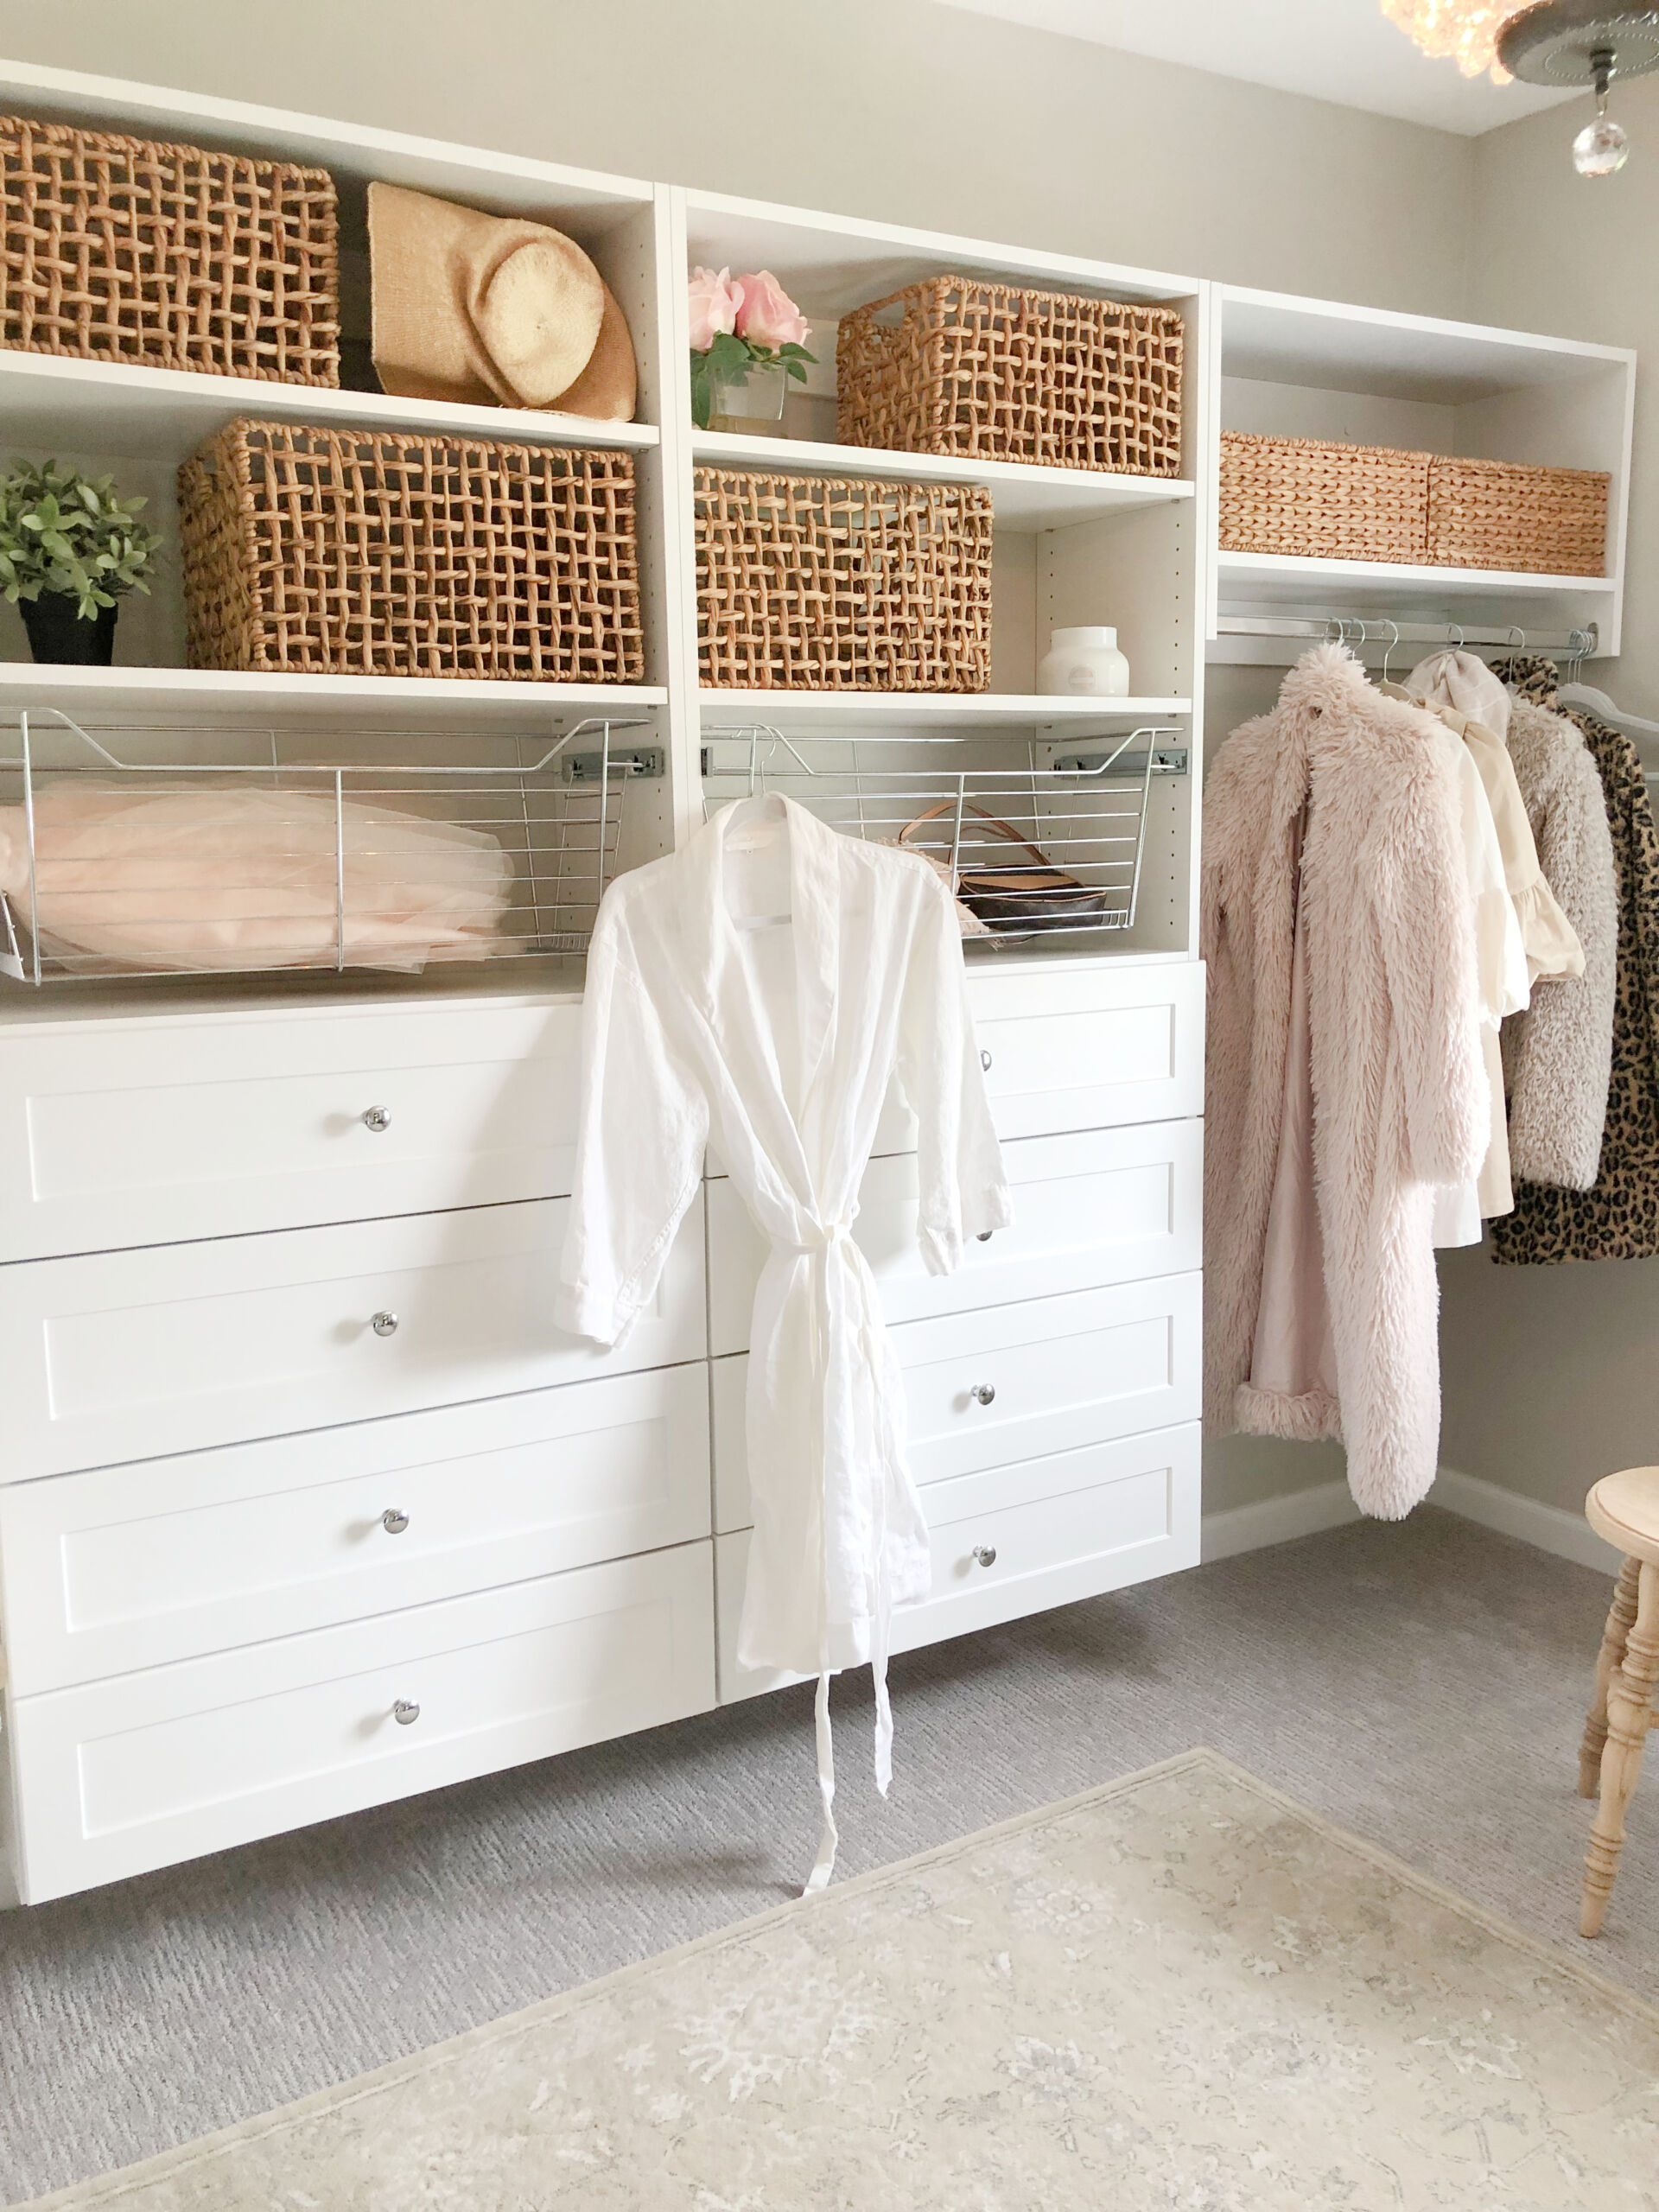 42 Things in Your Master Bedroom Closet and Drawers - Toot Sweet 4 Two